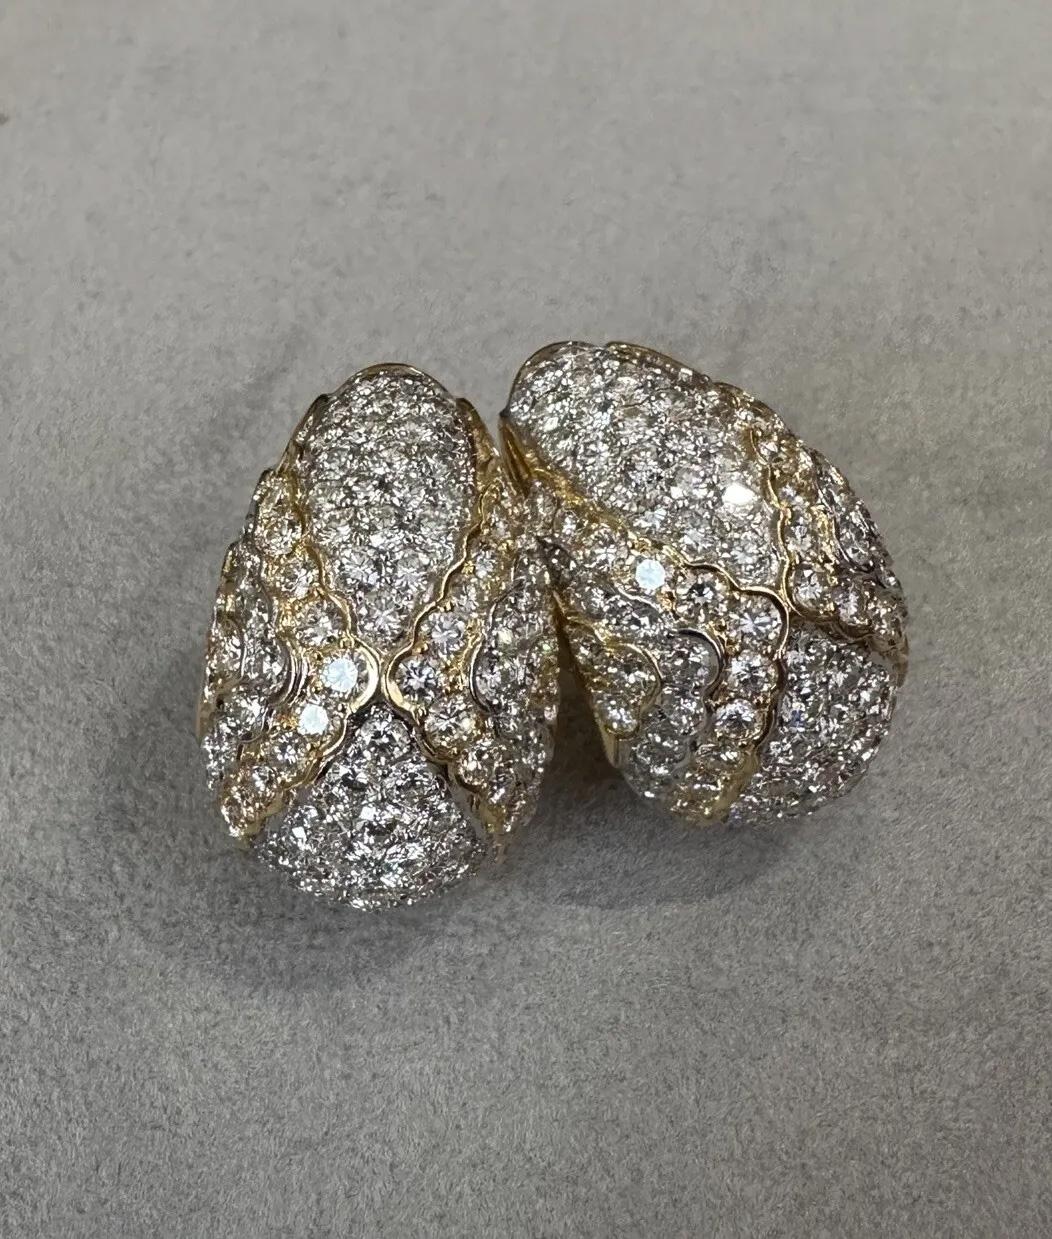 Estate Diamond Pave Drop Earrings 7.40 Carat Total Weight in 18k Yellow Gold 

Diamond Half-hoop Drop Earrings feature 7.40 carats of Round Brilliant Diamonds with a subtle X design Pave set in 18k Yellow Gold.

Total diamond weight is 7.40